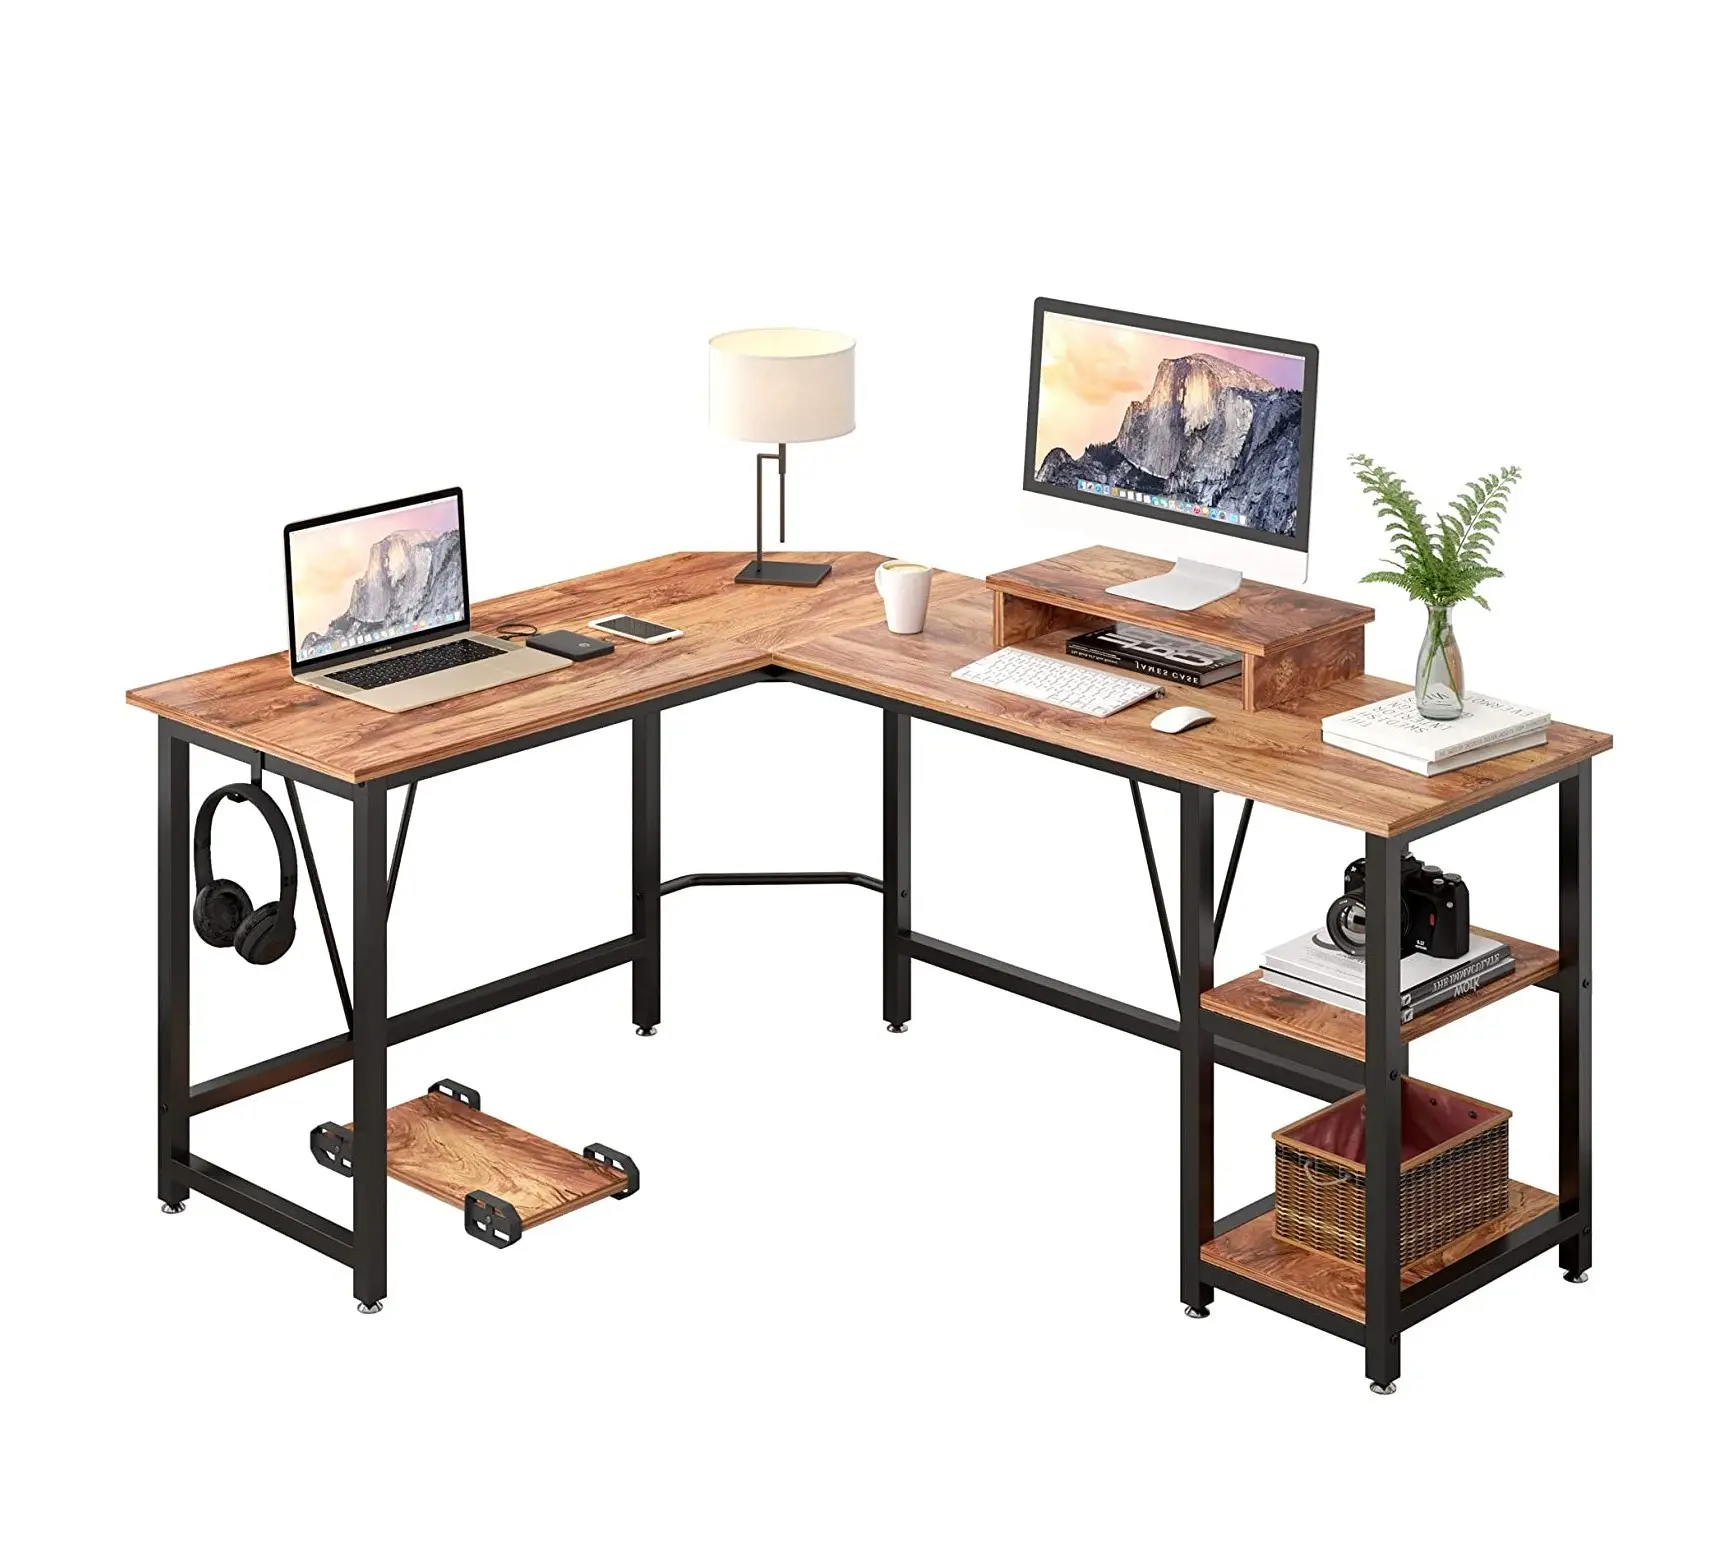 L-shape Modern Style Wood And Metal Frame Computer Desk With 2-tier Shelf